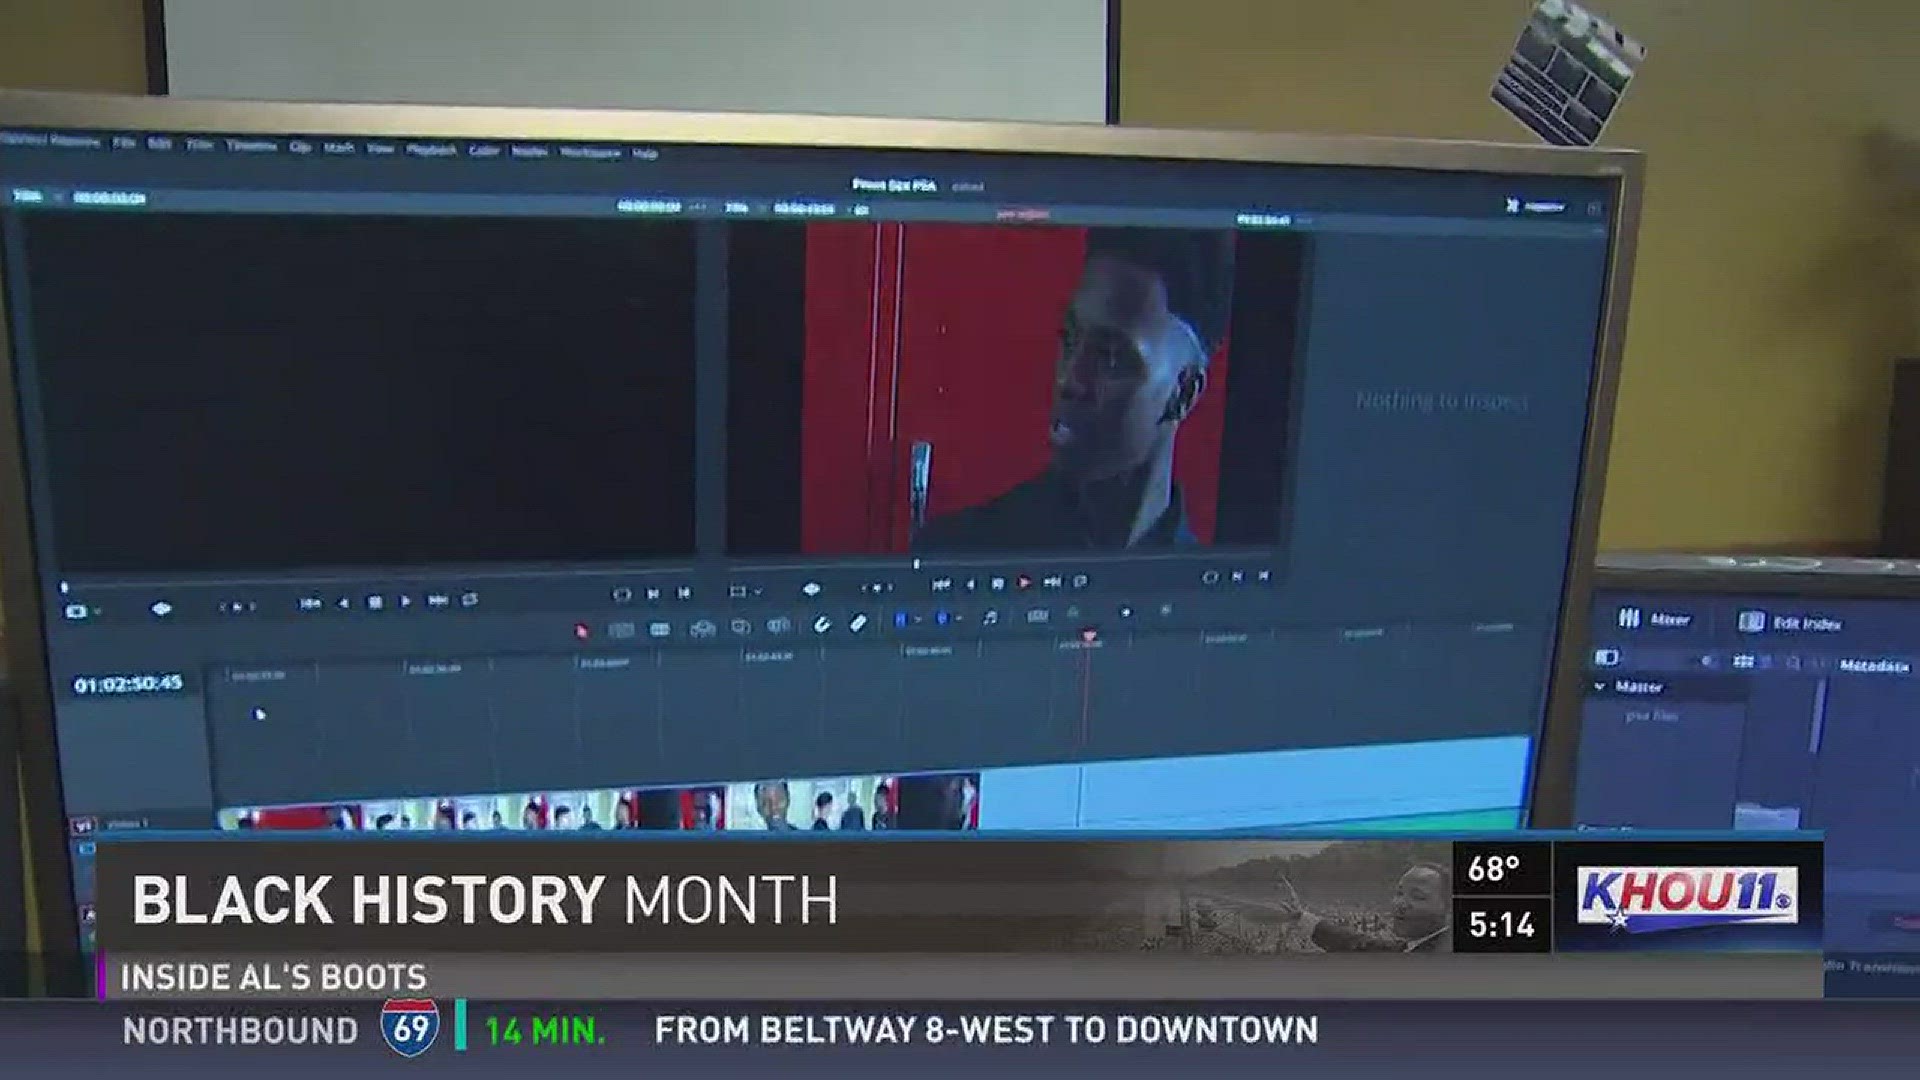 In honor of black history month - we take a look at the oldest high school media program in HISD.